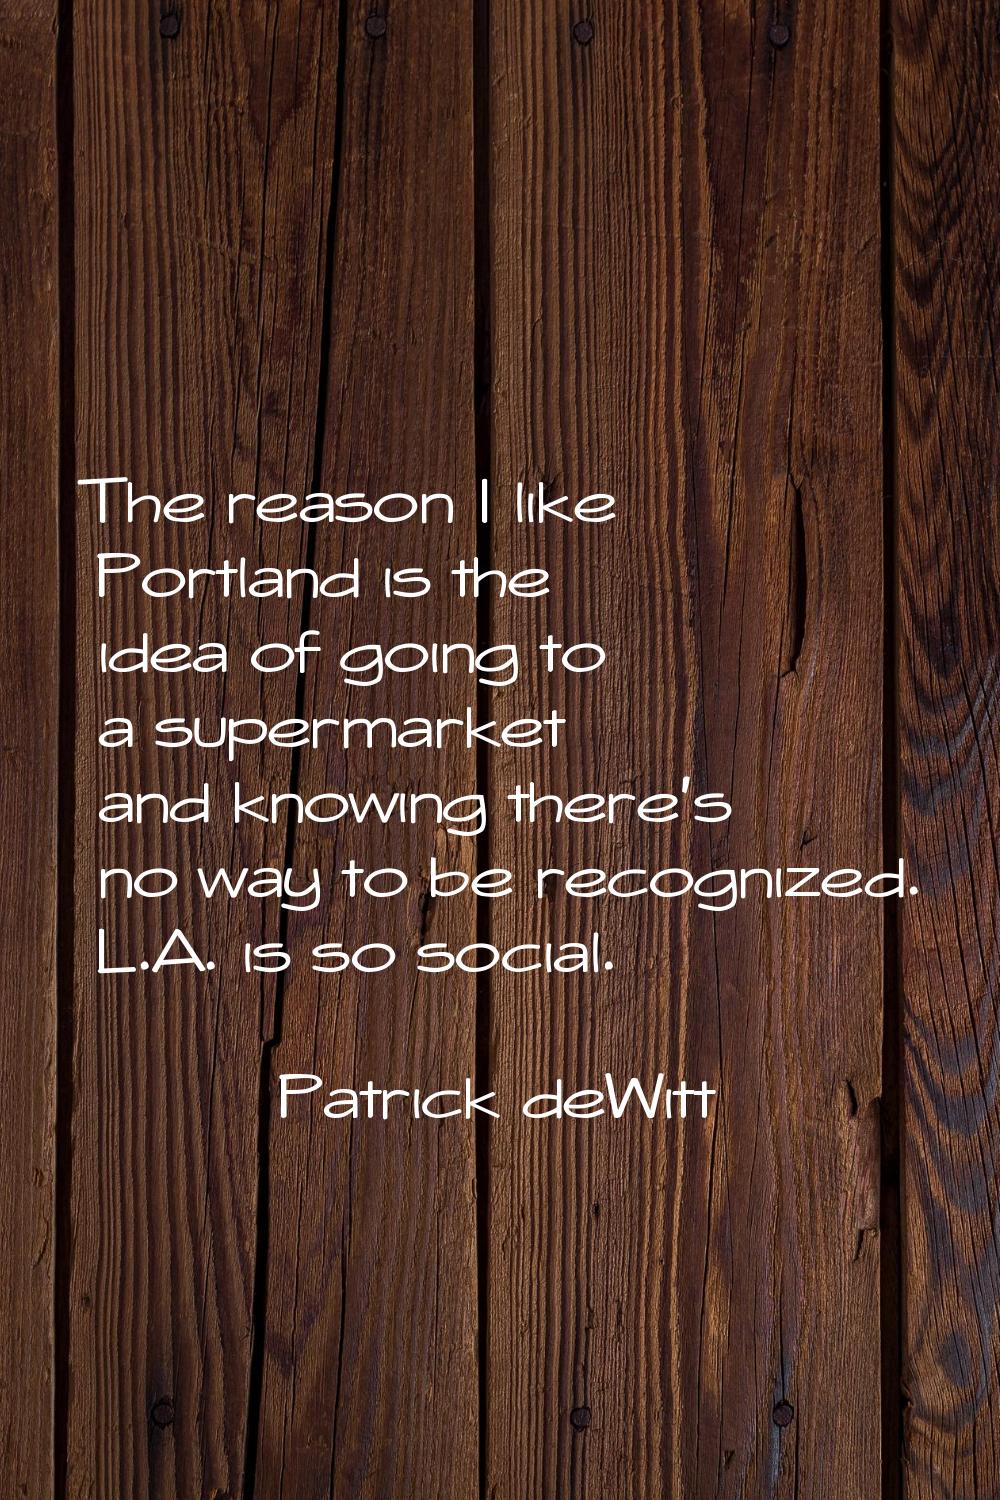 The reason I like Portland is the idea of going to a supermarket and knowing there's no way to be r